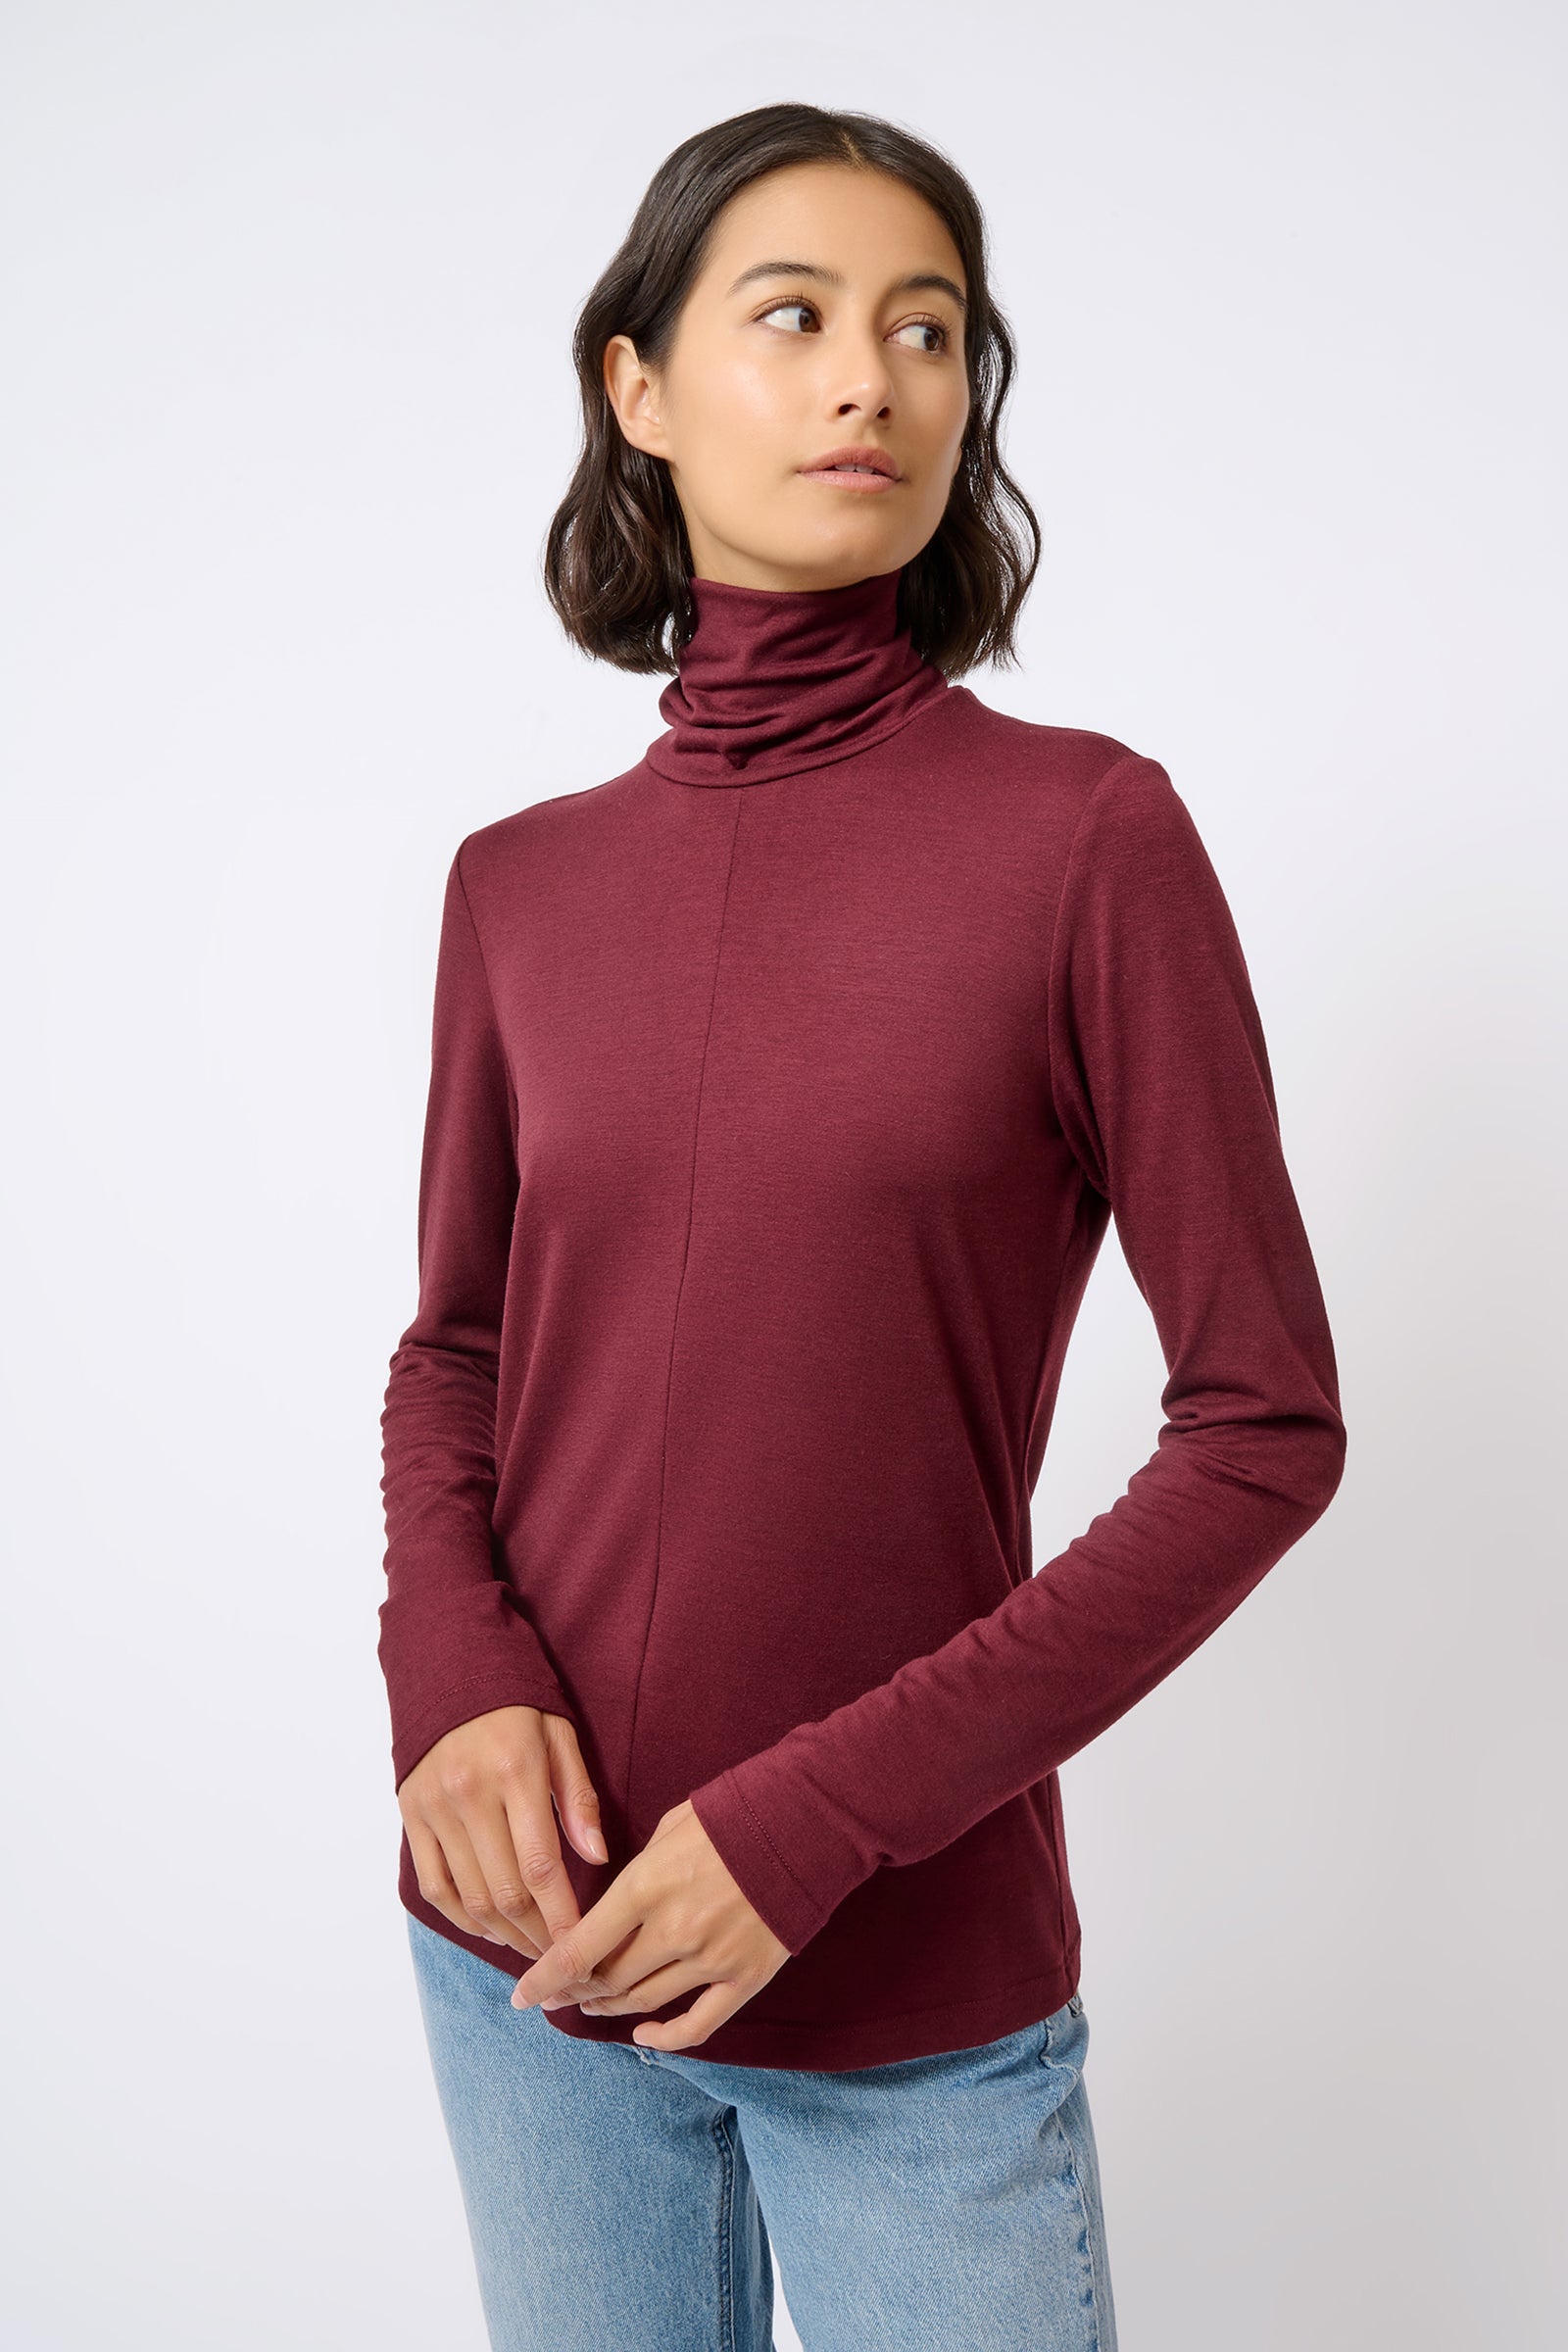 Kal Rieman Seamed Fitted Turtleneck in Wine Color on Model Looking to the Side